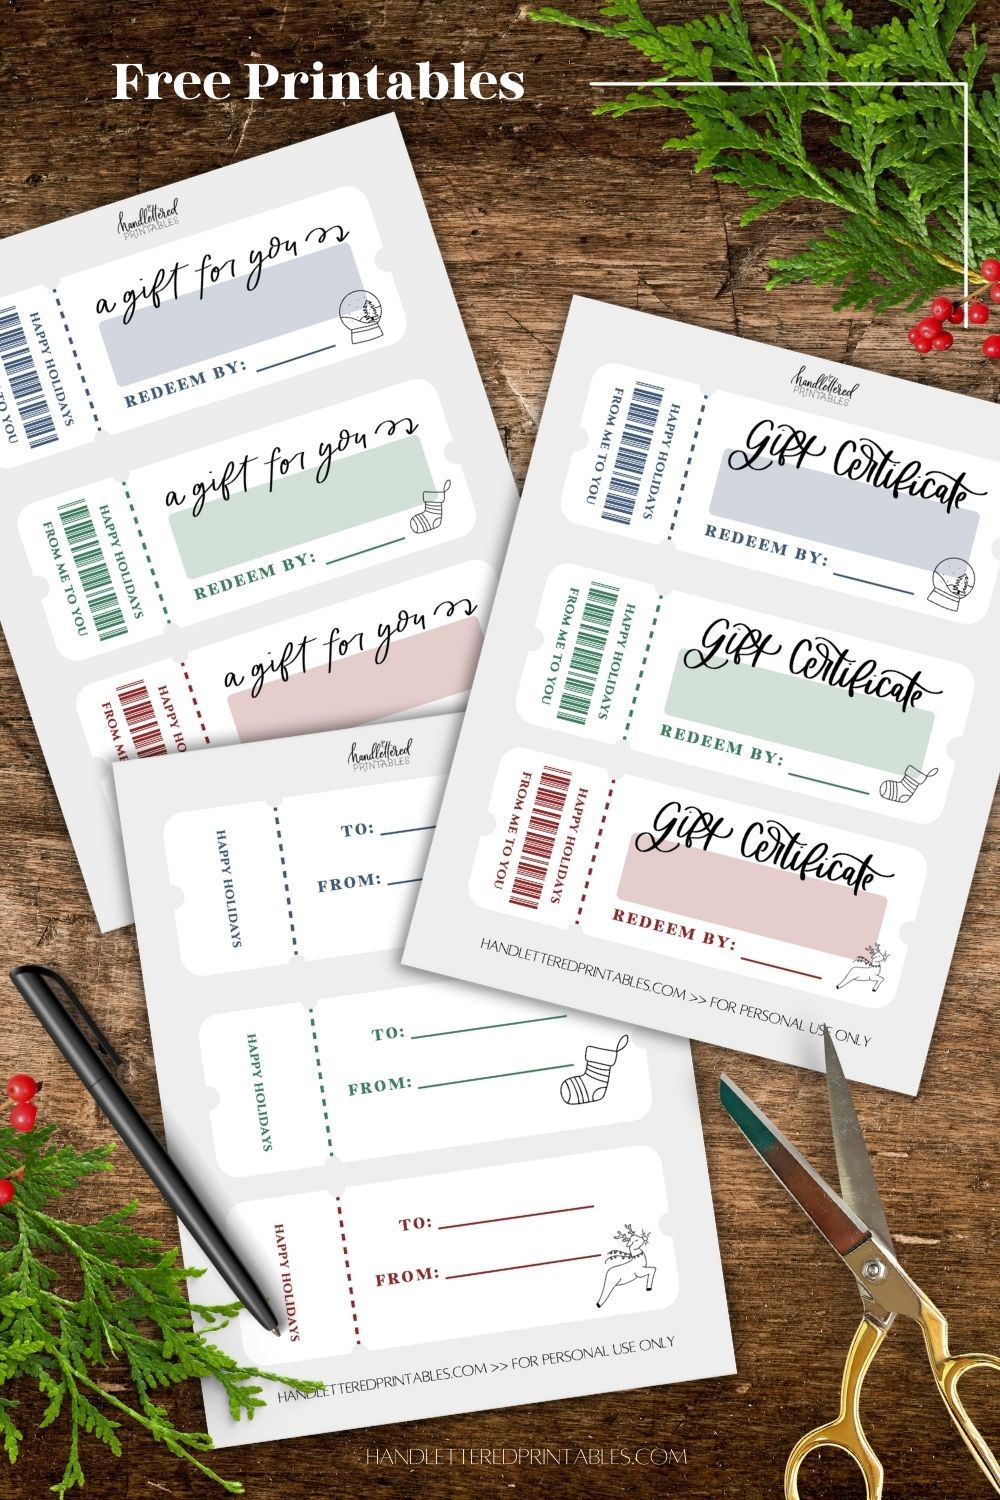 free printable christmas GC template, image shows three pages printed off with text that reads free printable